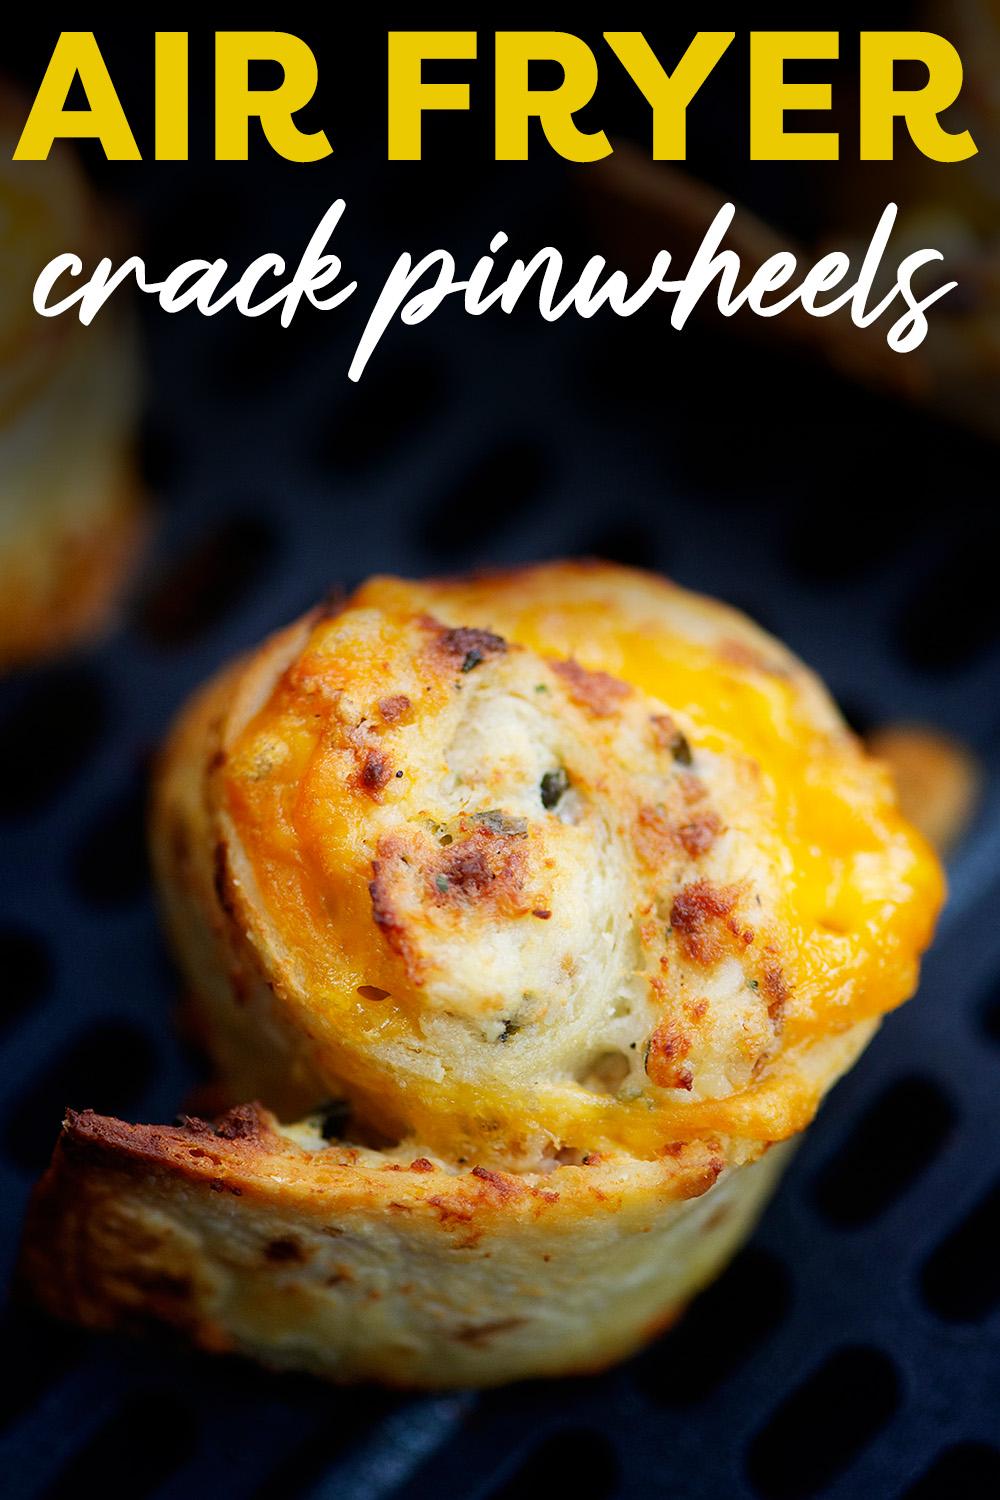 These crack chicken pinwheels will have you coming back for more and more!  Perfect for a meal or an appetizer!